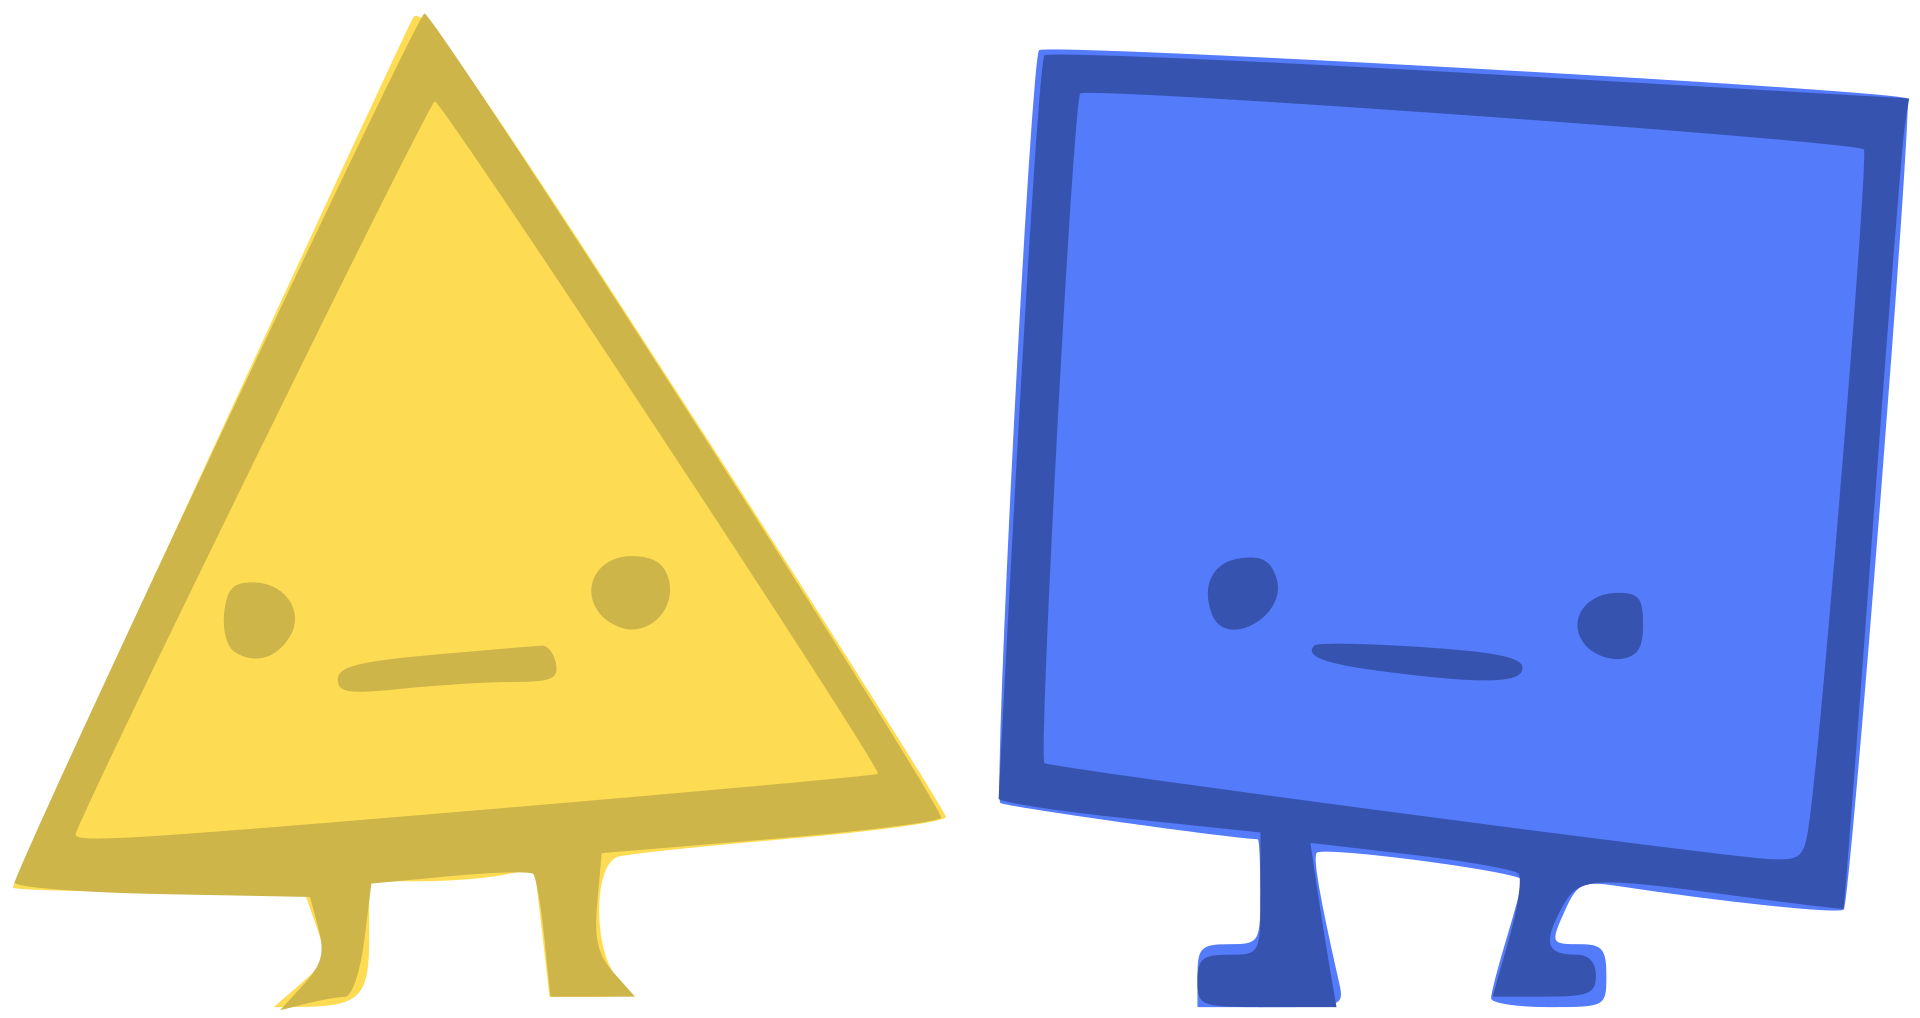 A yellow triangle and a blue square looking a bit sad